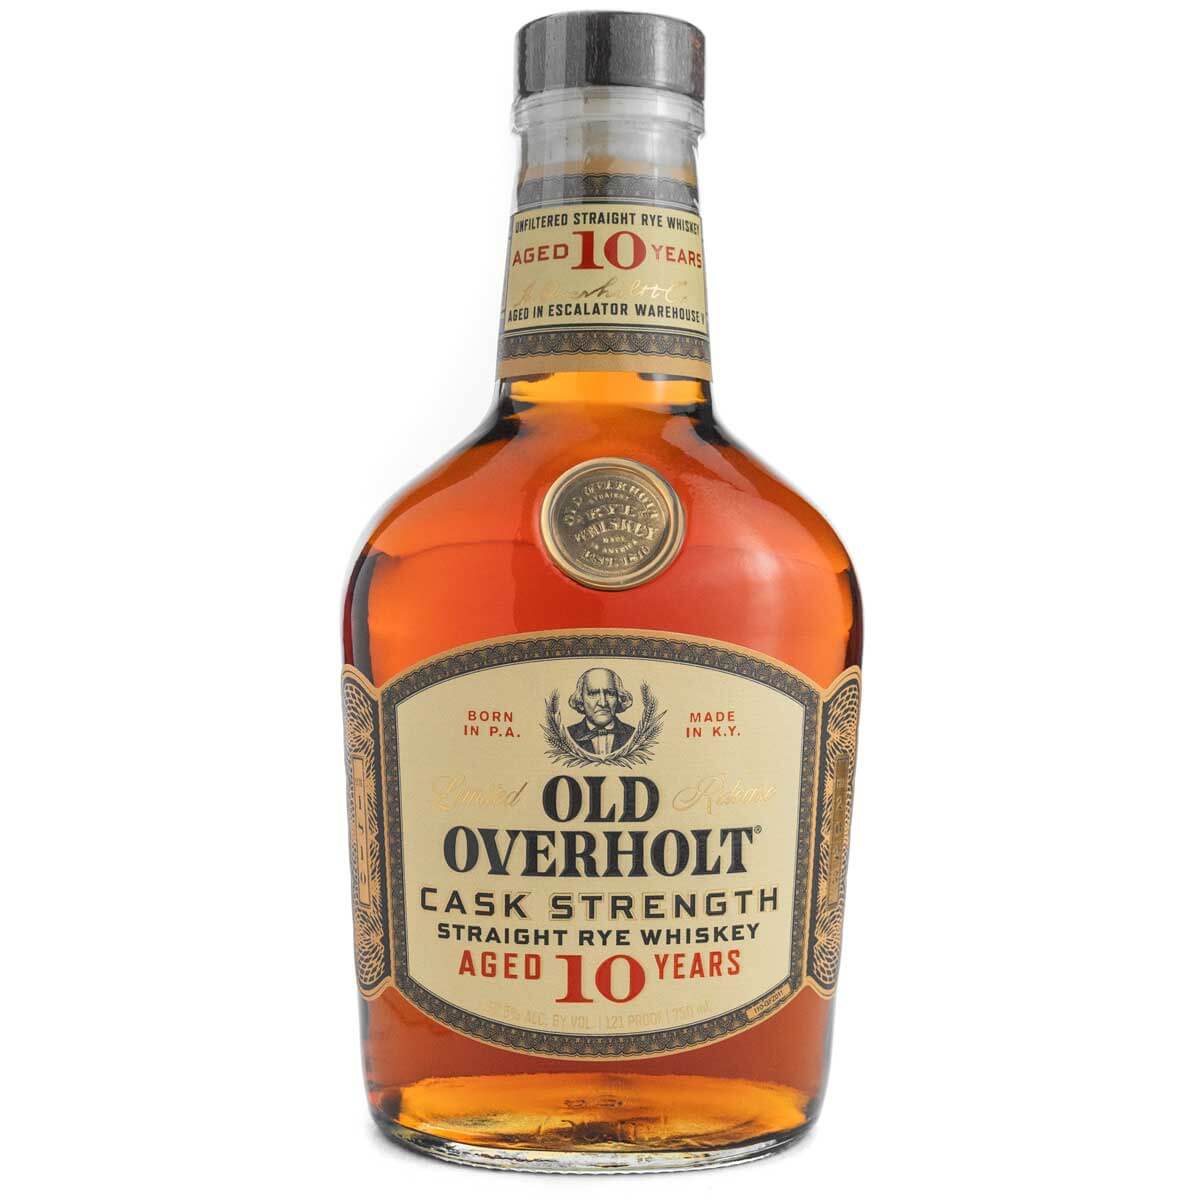 Old Overholt Cask Strength Rye Whiskey Aged 10 Years